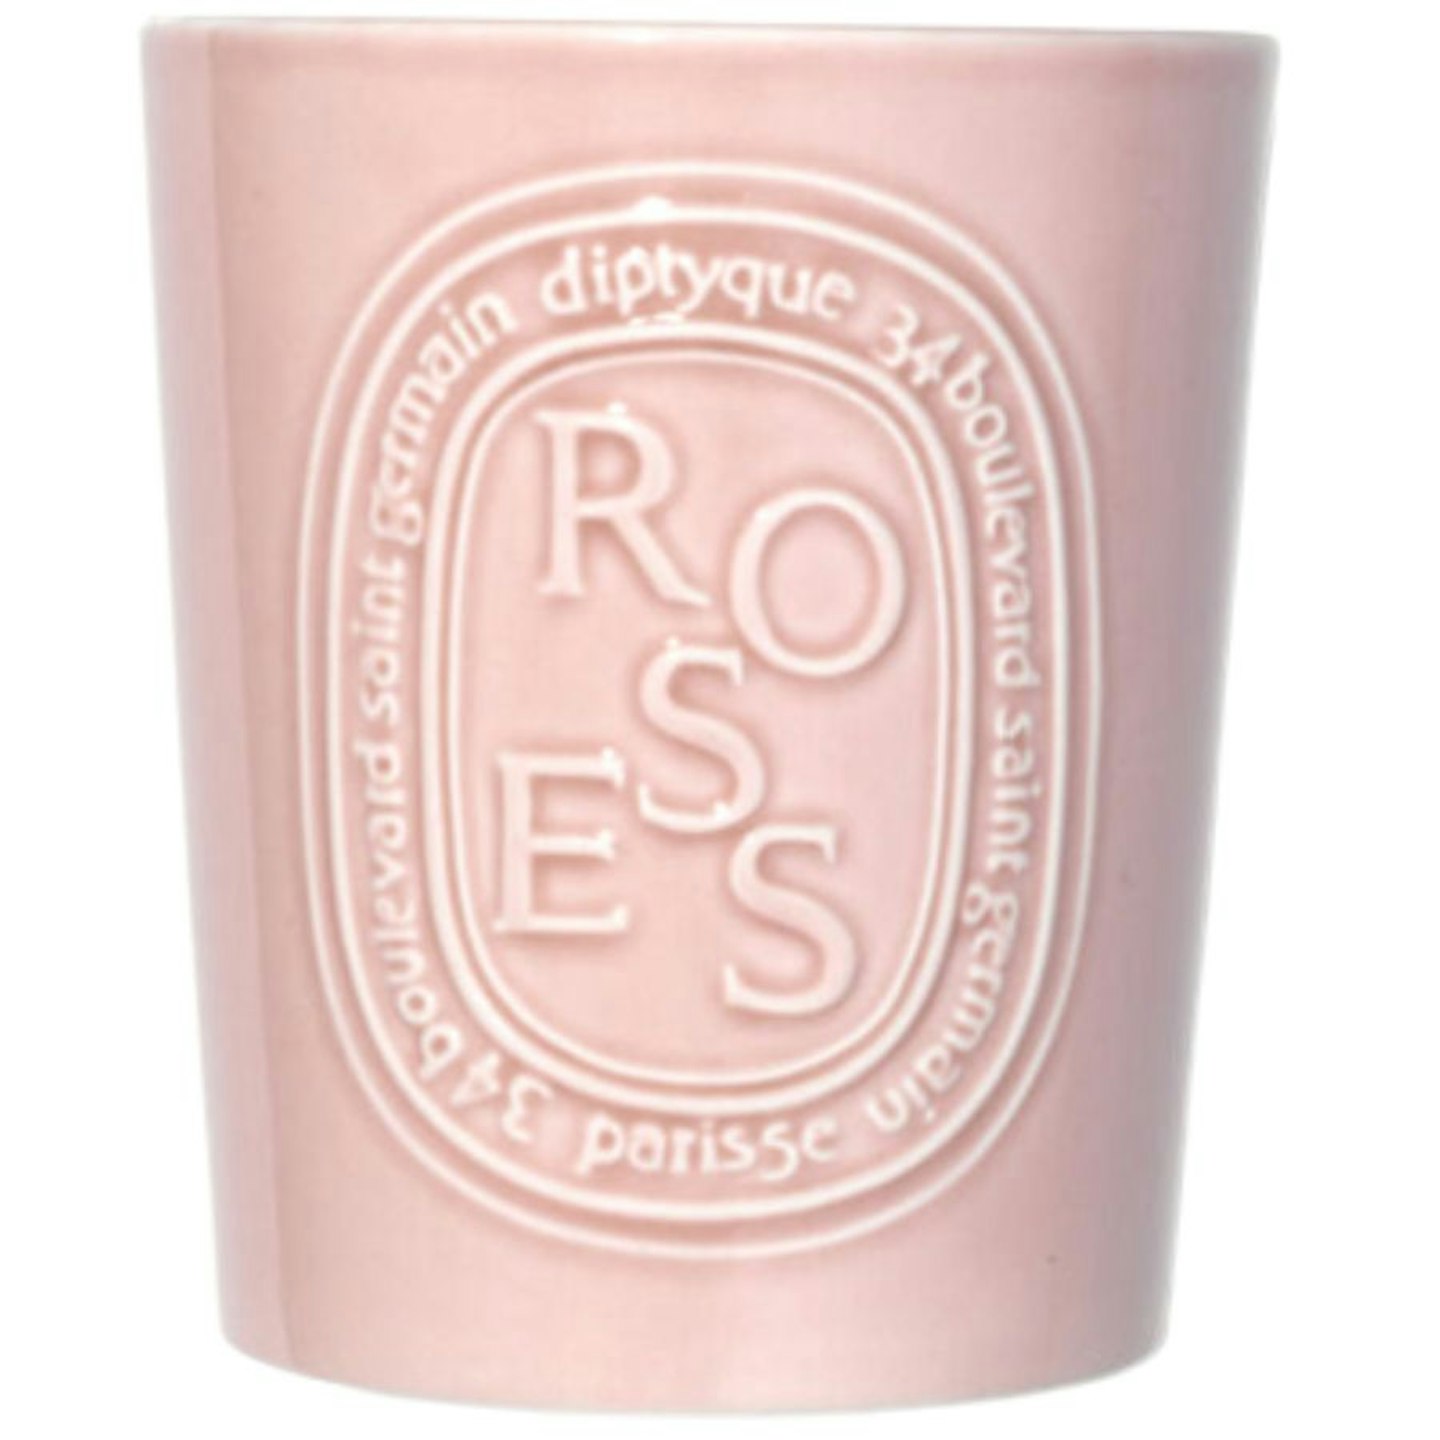 Diptyque 600G Roses Candle